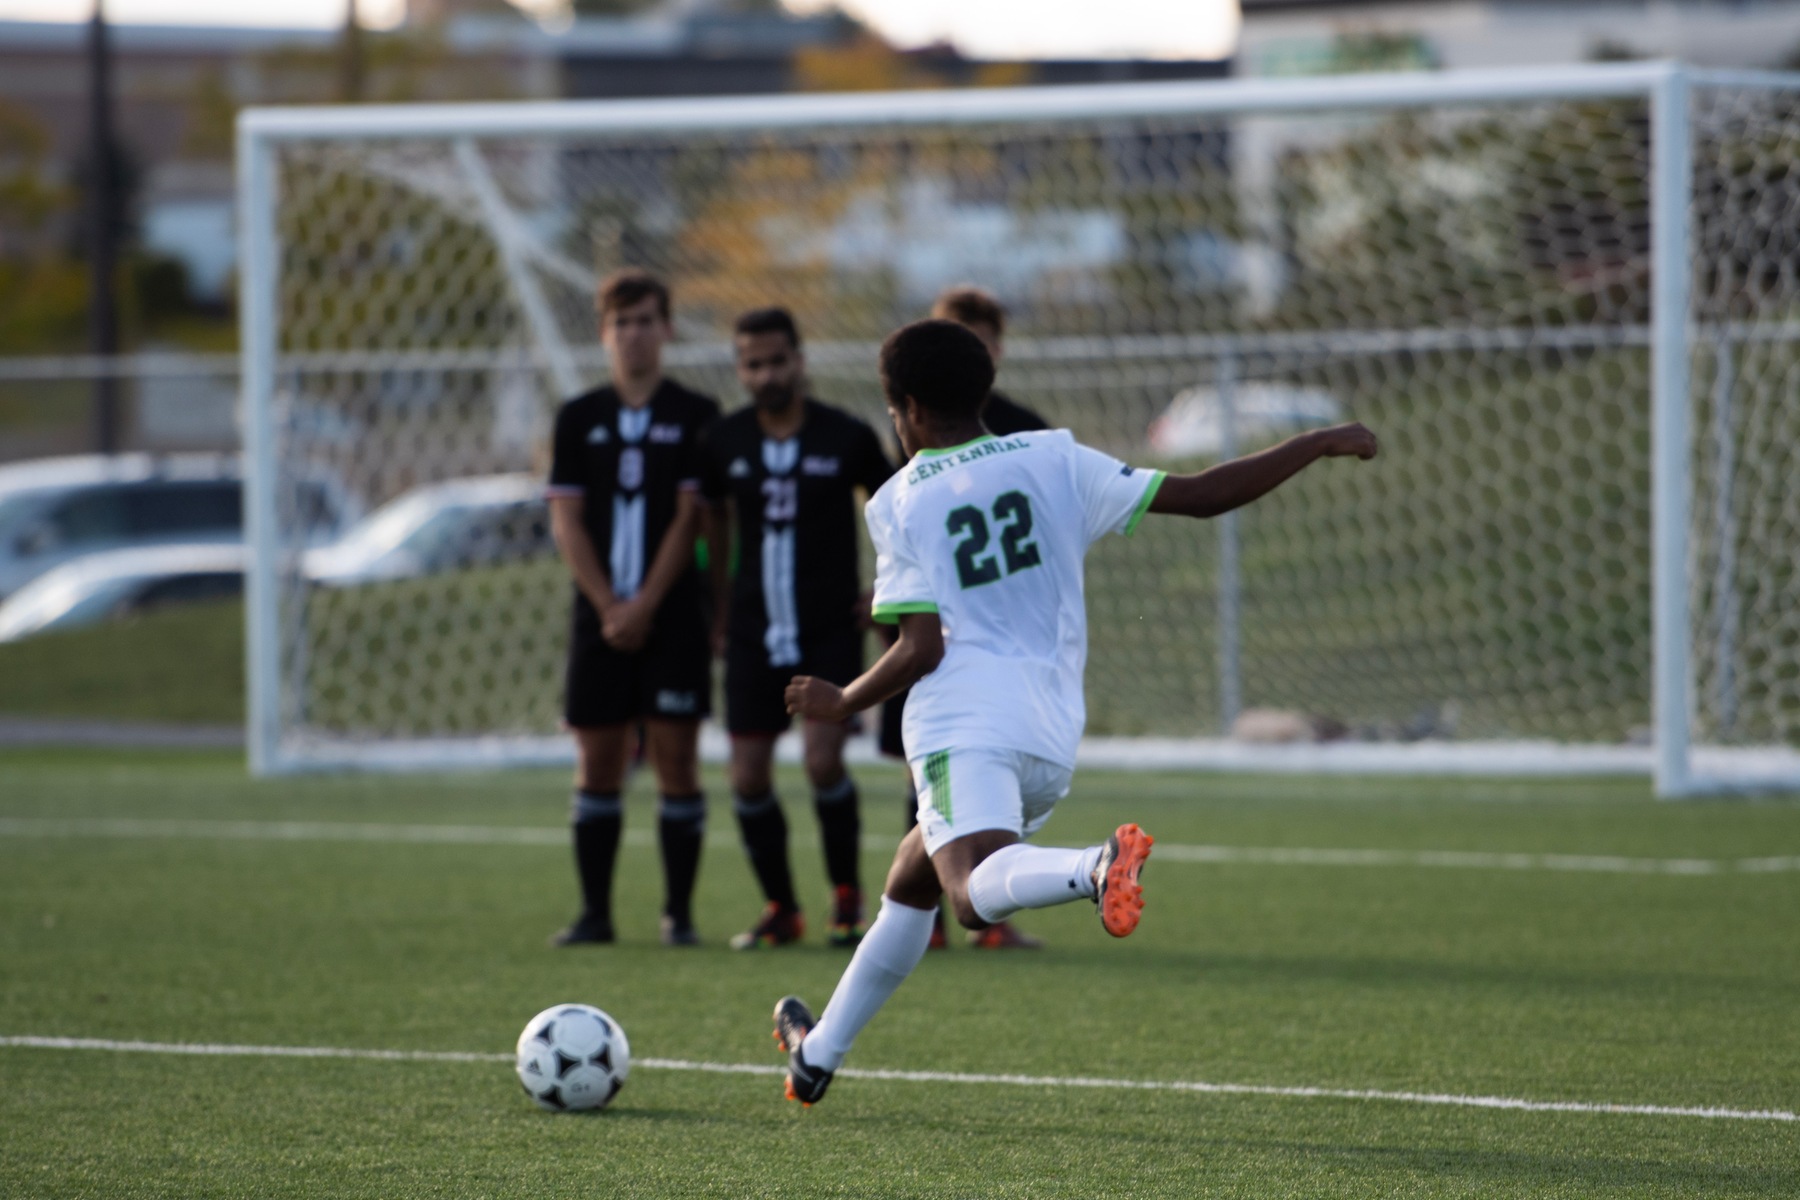 The Colts' Terrell Roberts goes for goal on a free kick attempt during second half action between Centennial and the St. Lawrence Vikings. The home team controlled the pace in the 3-0 victory over the Vikings (Via Dulay/Sports Information Officer)